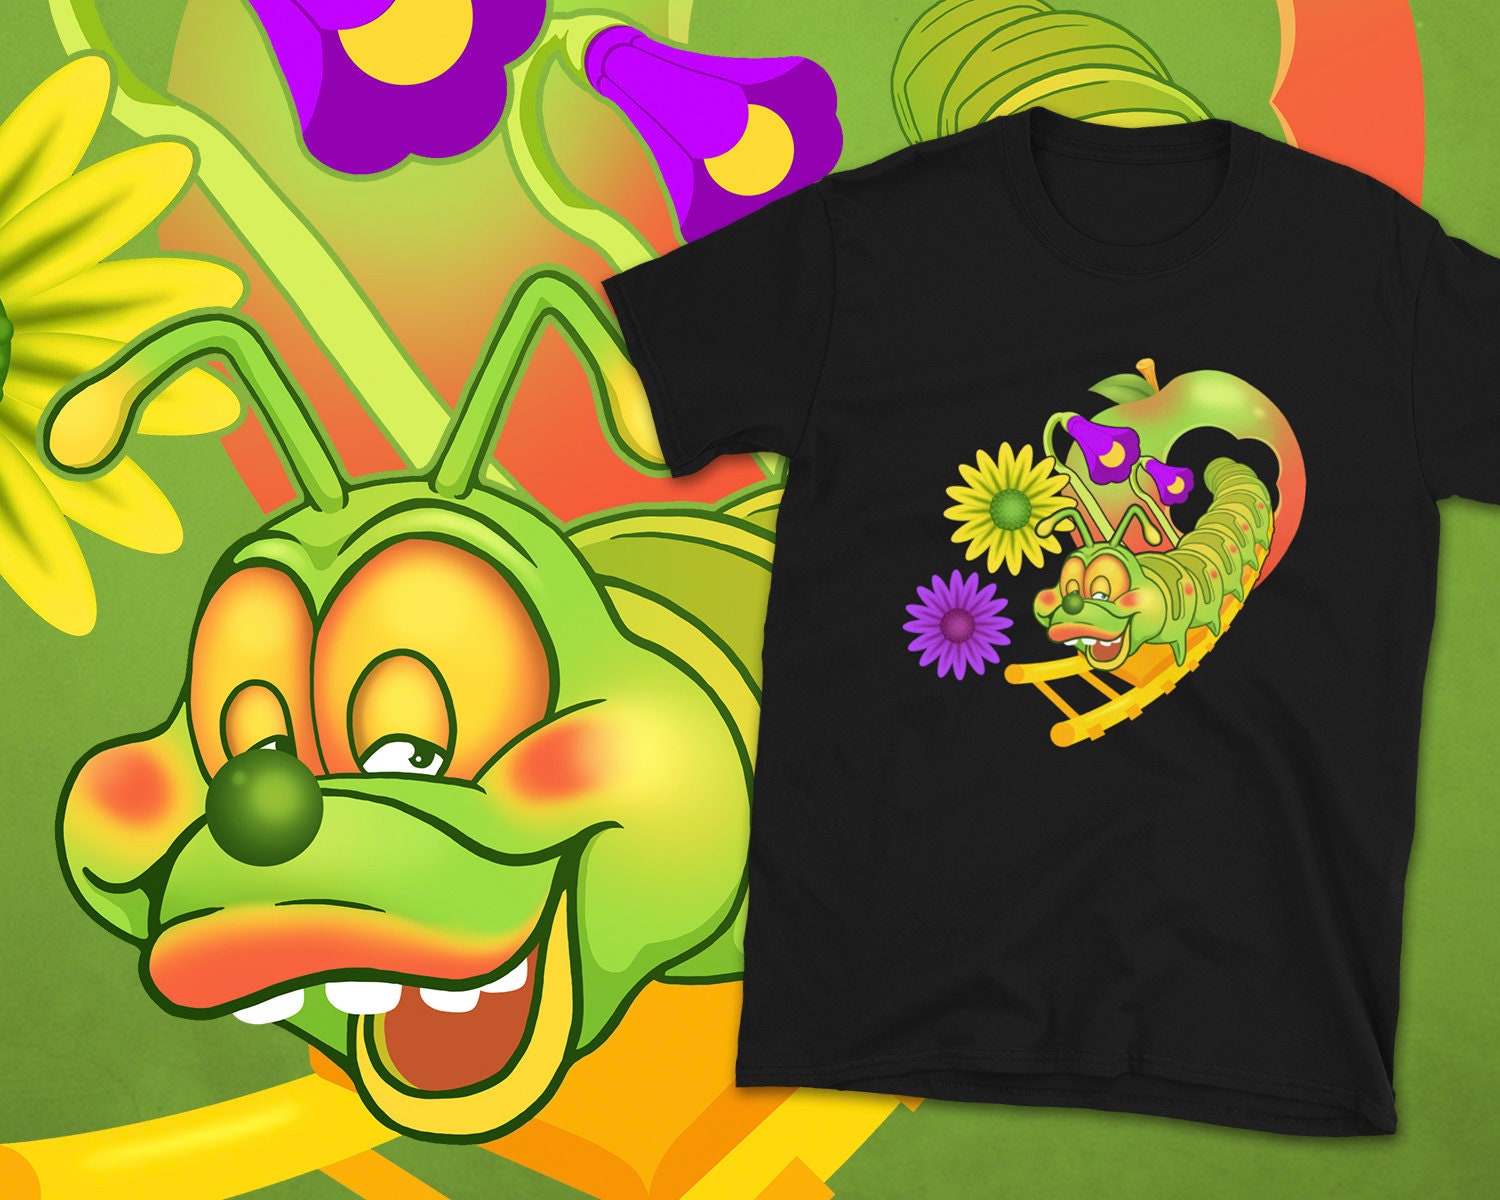 Wacky Worm Shirt, Funny Roller Coaster Tshirt, Theme Park T-Shirts, Cred Counting Coaster Enthusiast